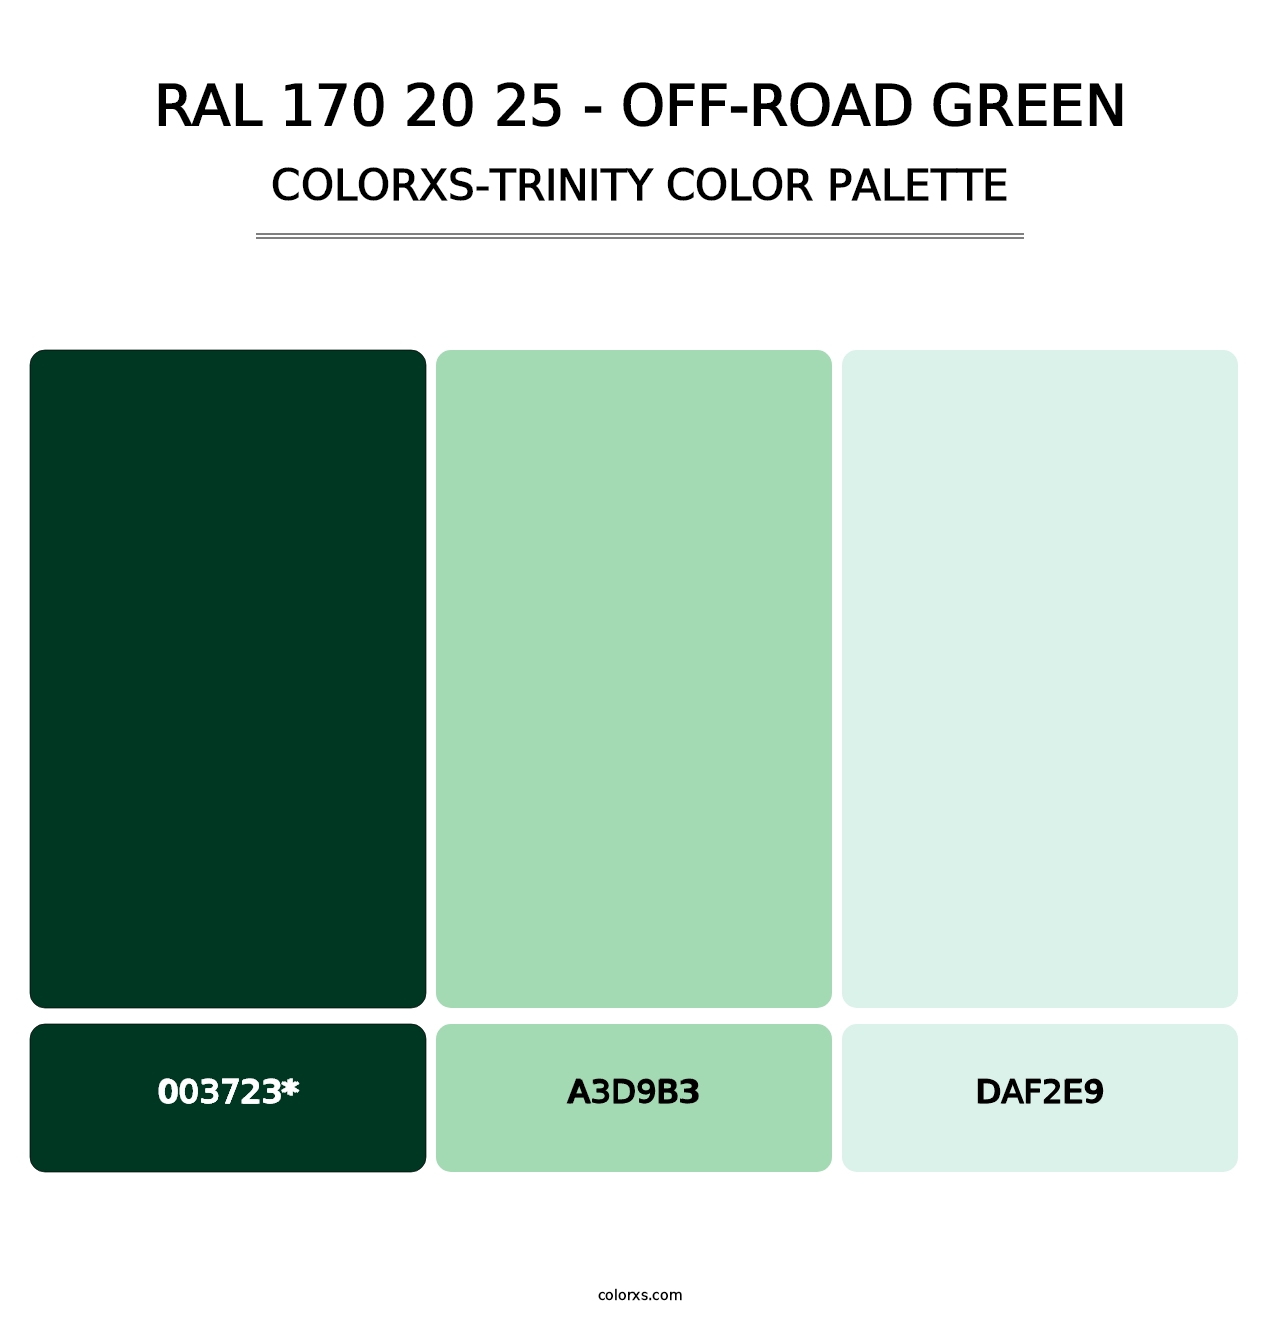 RAL 170 20 25 - Off-Road Green - Colorxs Trinity Palette